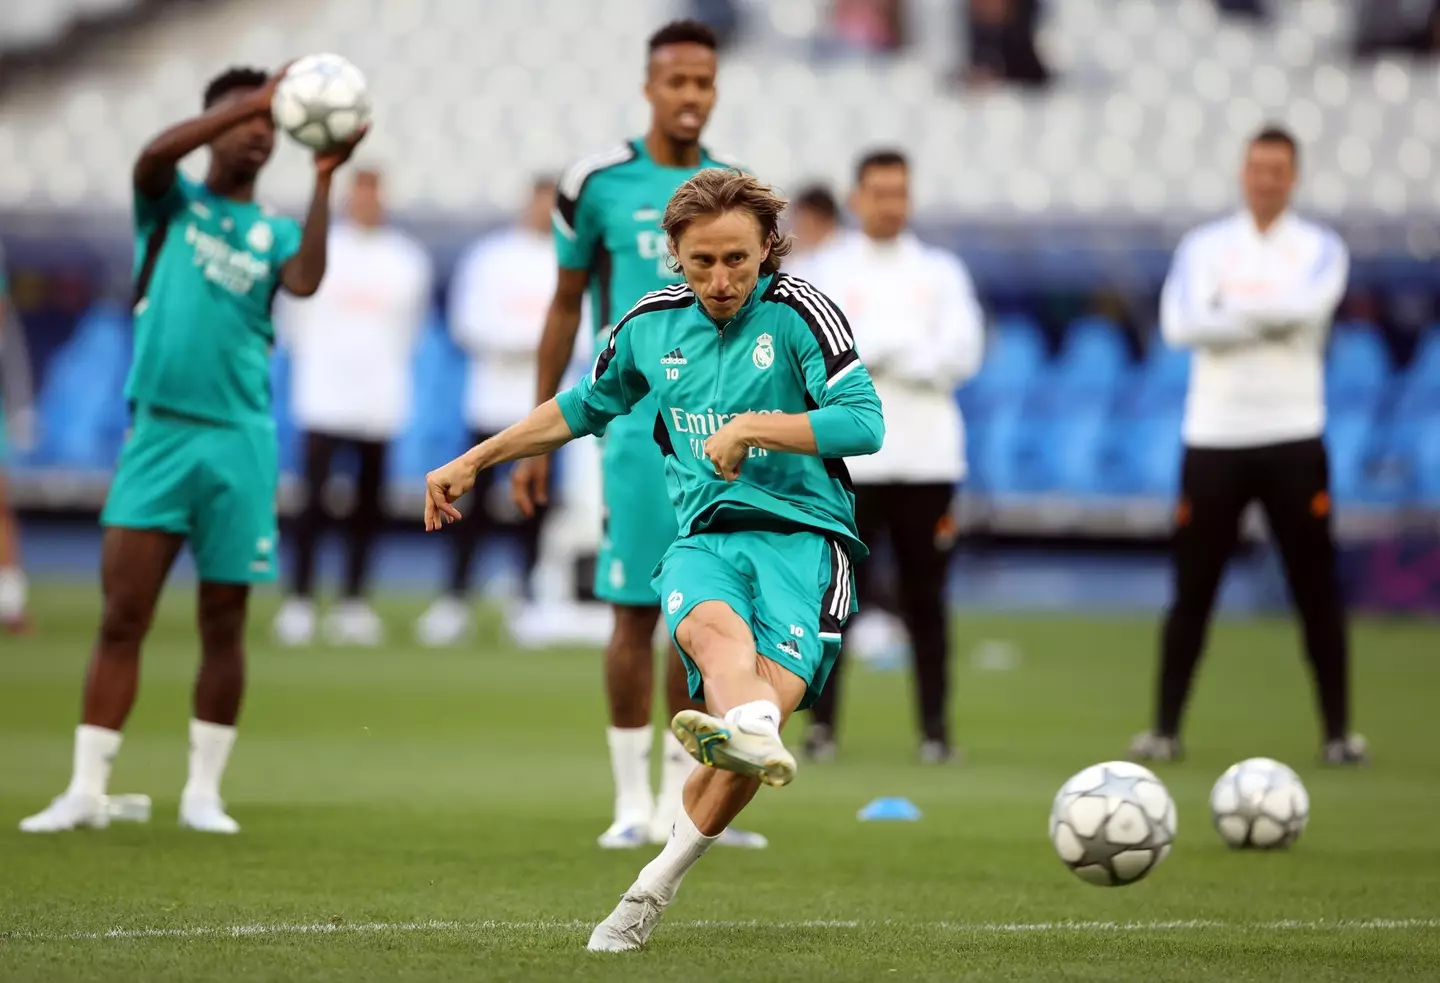 Modric in training earlier this year. (Image